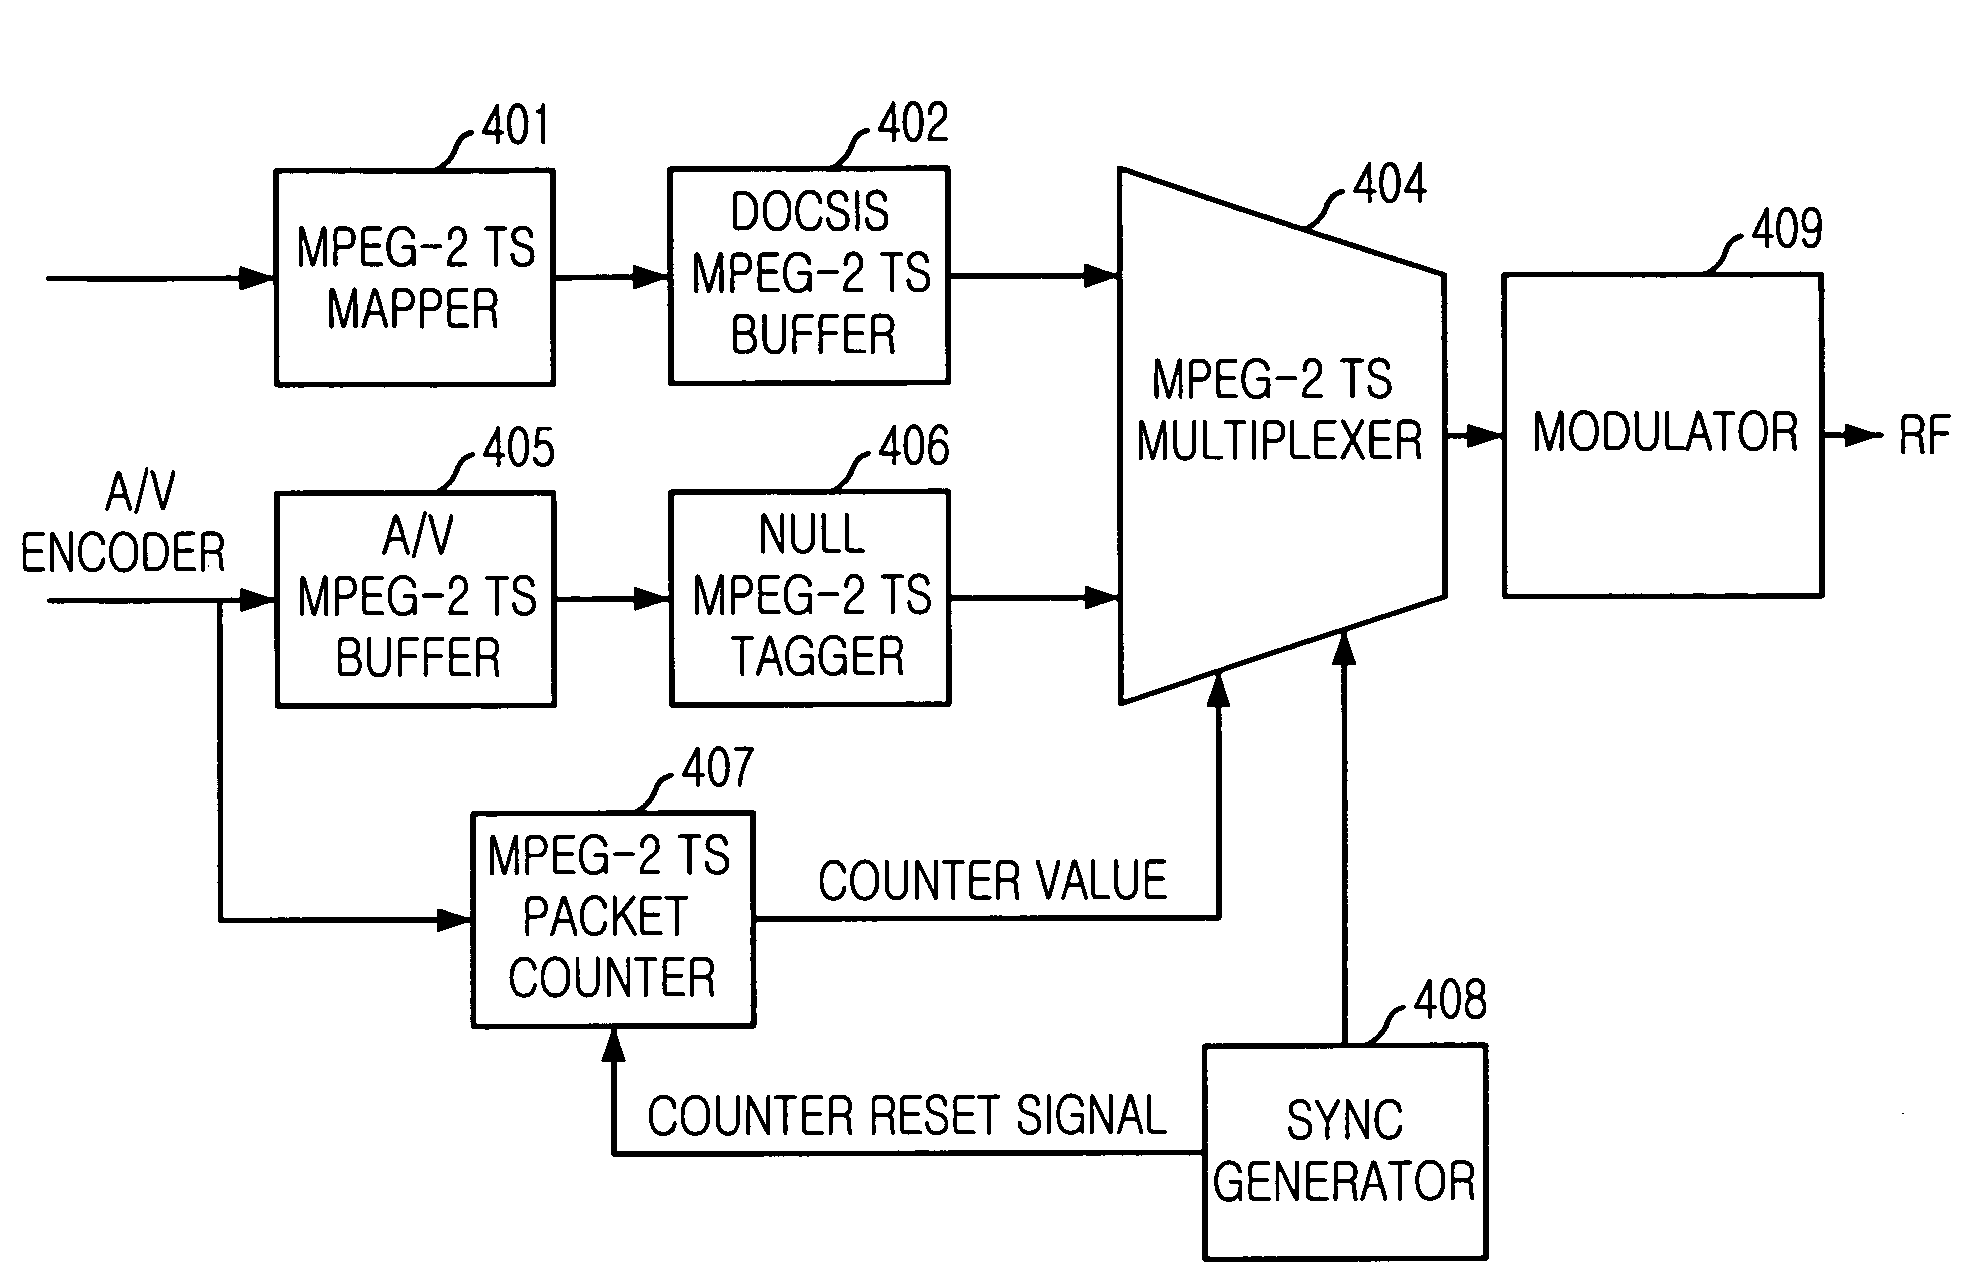 Apparatus for transmitting/receiving communication and broadcasting data using multiplexing at transmission convergence layer